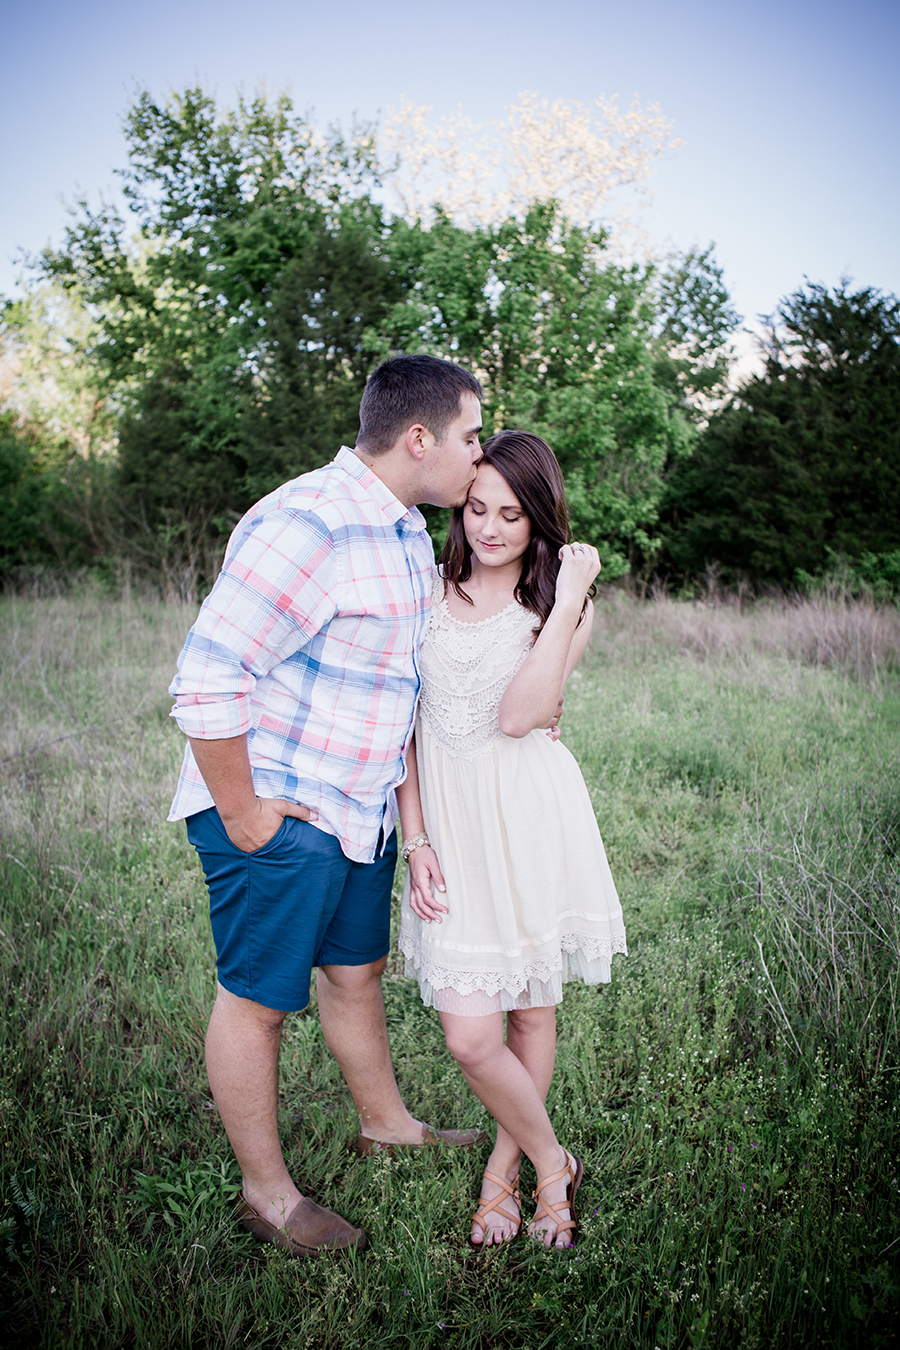 She plays with her hair engagement photo by Knoxville Wedding Photographer, Amanda May Photos.